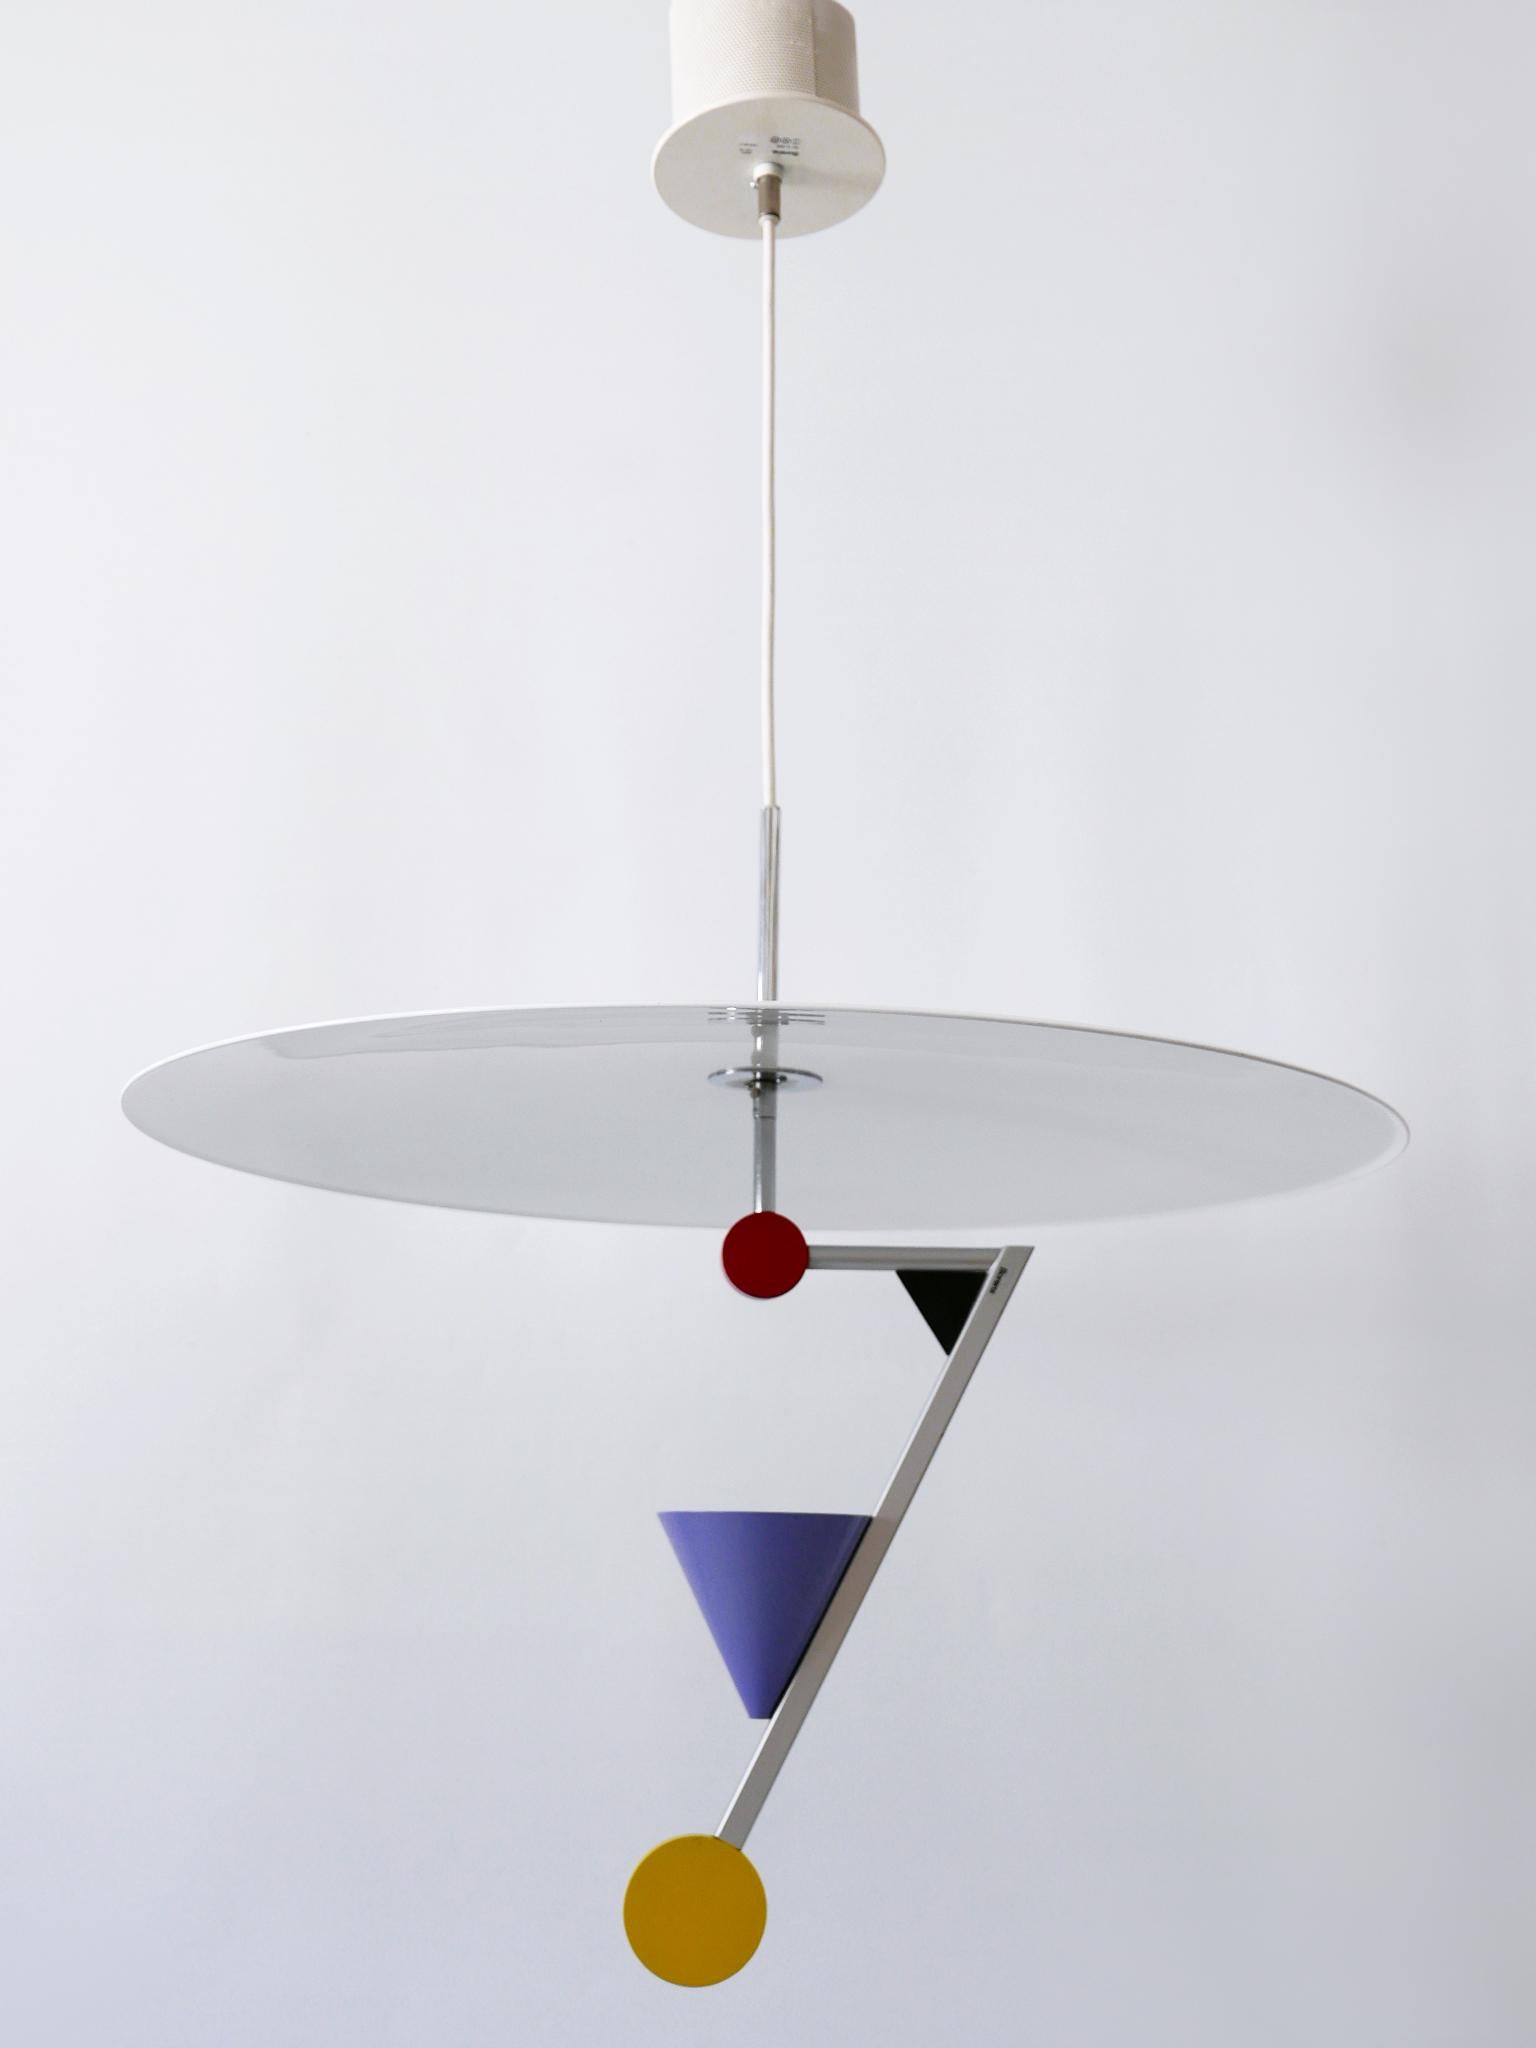 Incroyables lampes suspendues postmodernes Halo There d'Olle Andersson pour Borens 1982 en vente 5